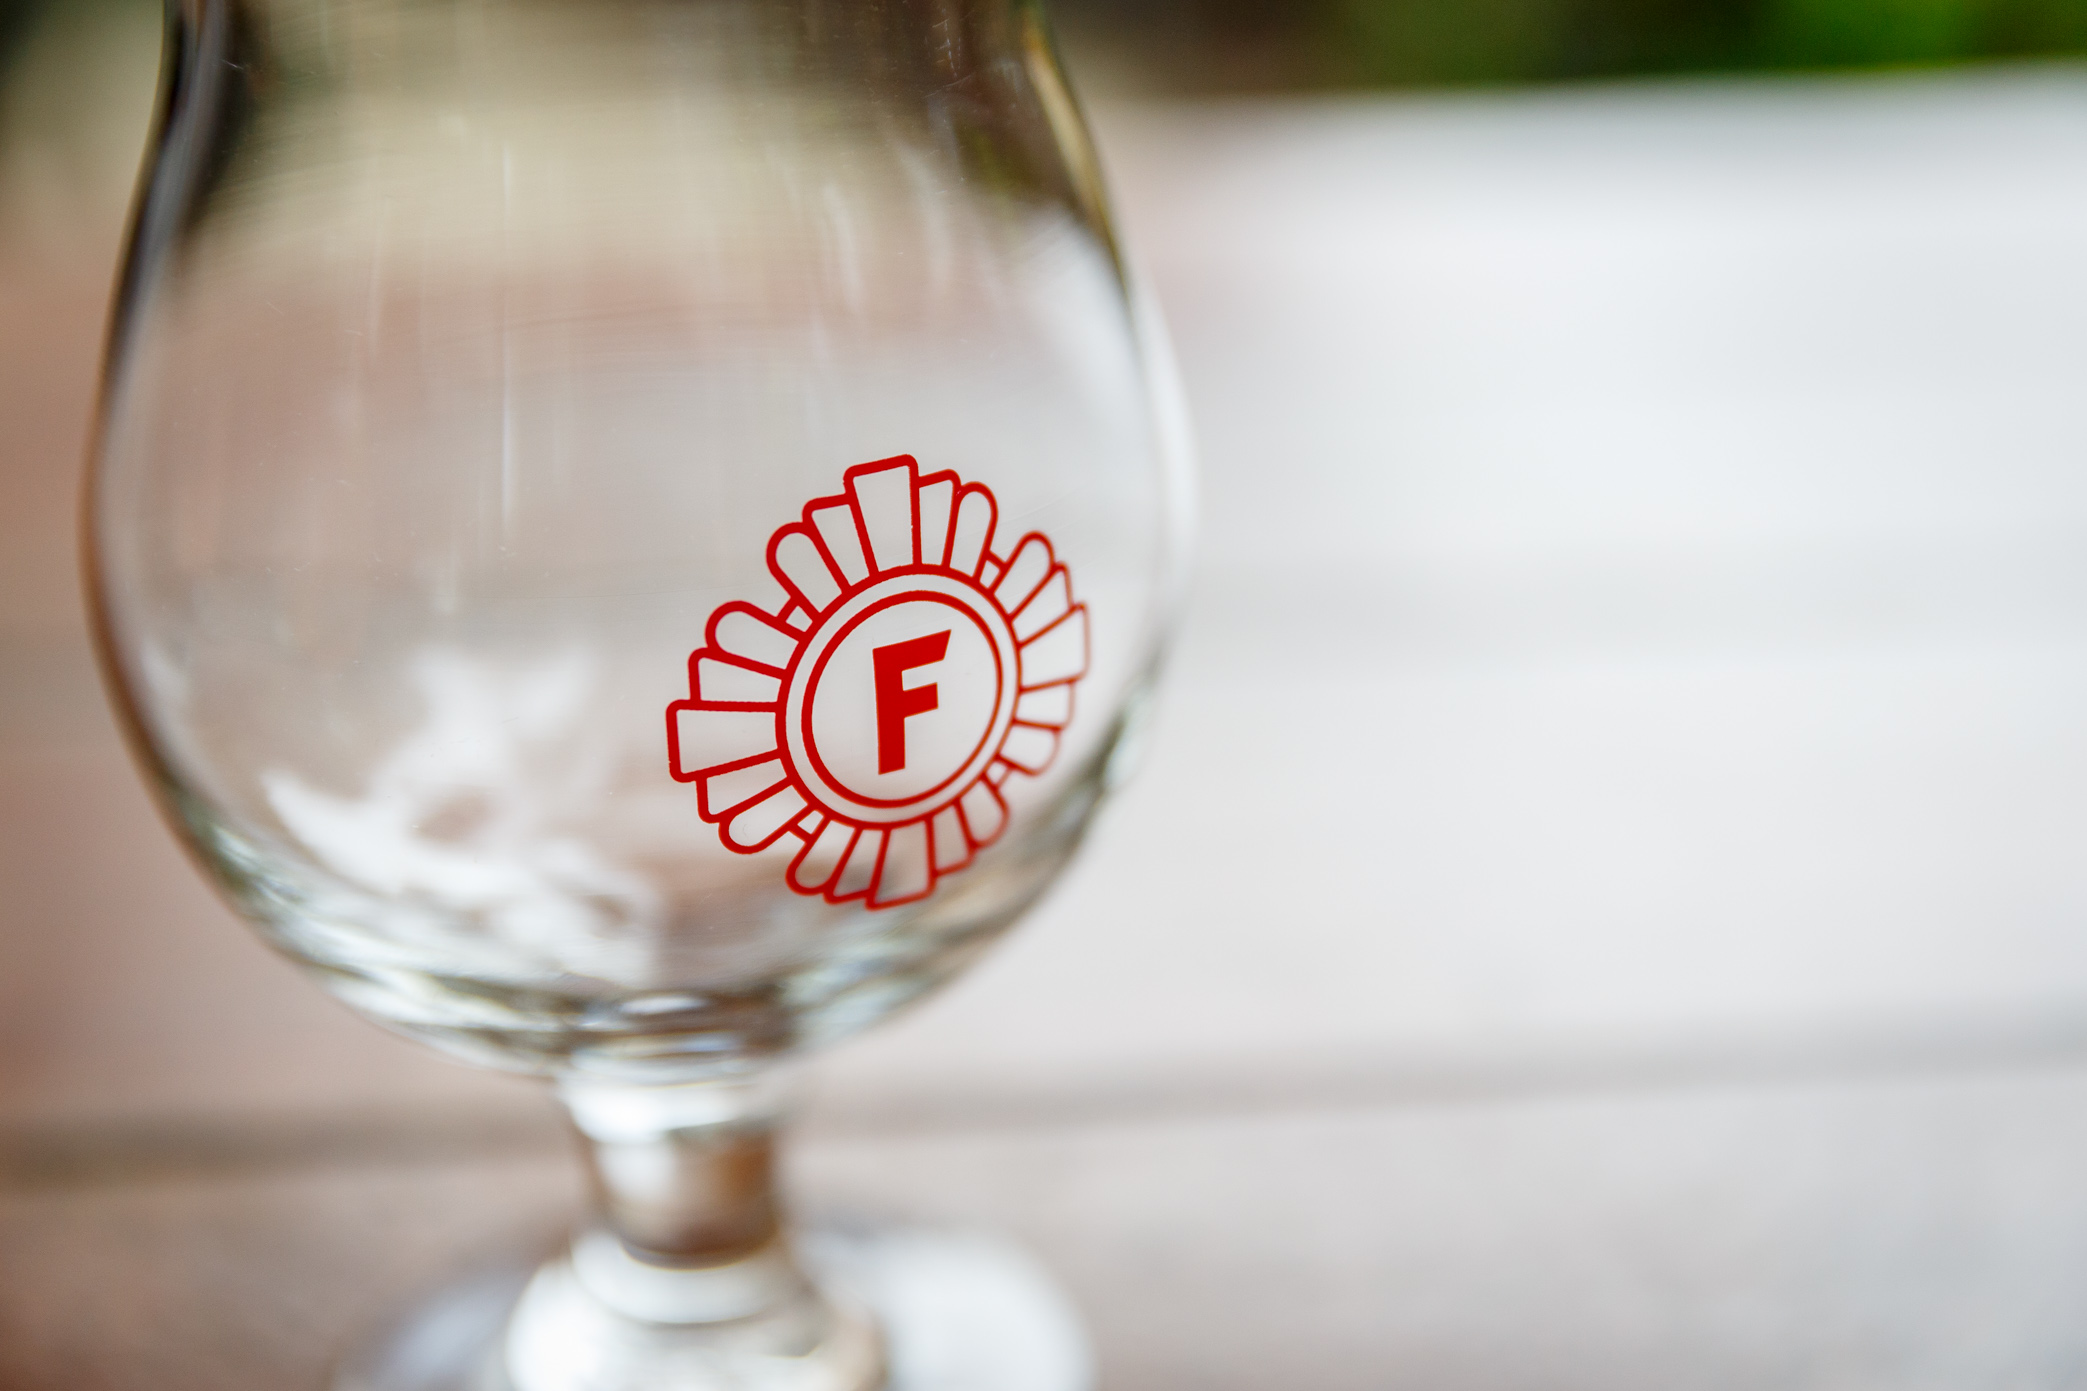 Fire Station beer glass